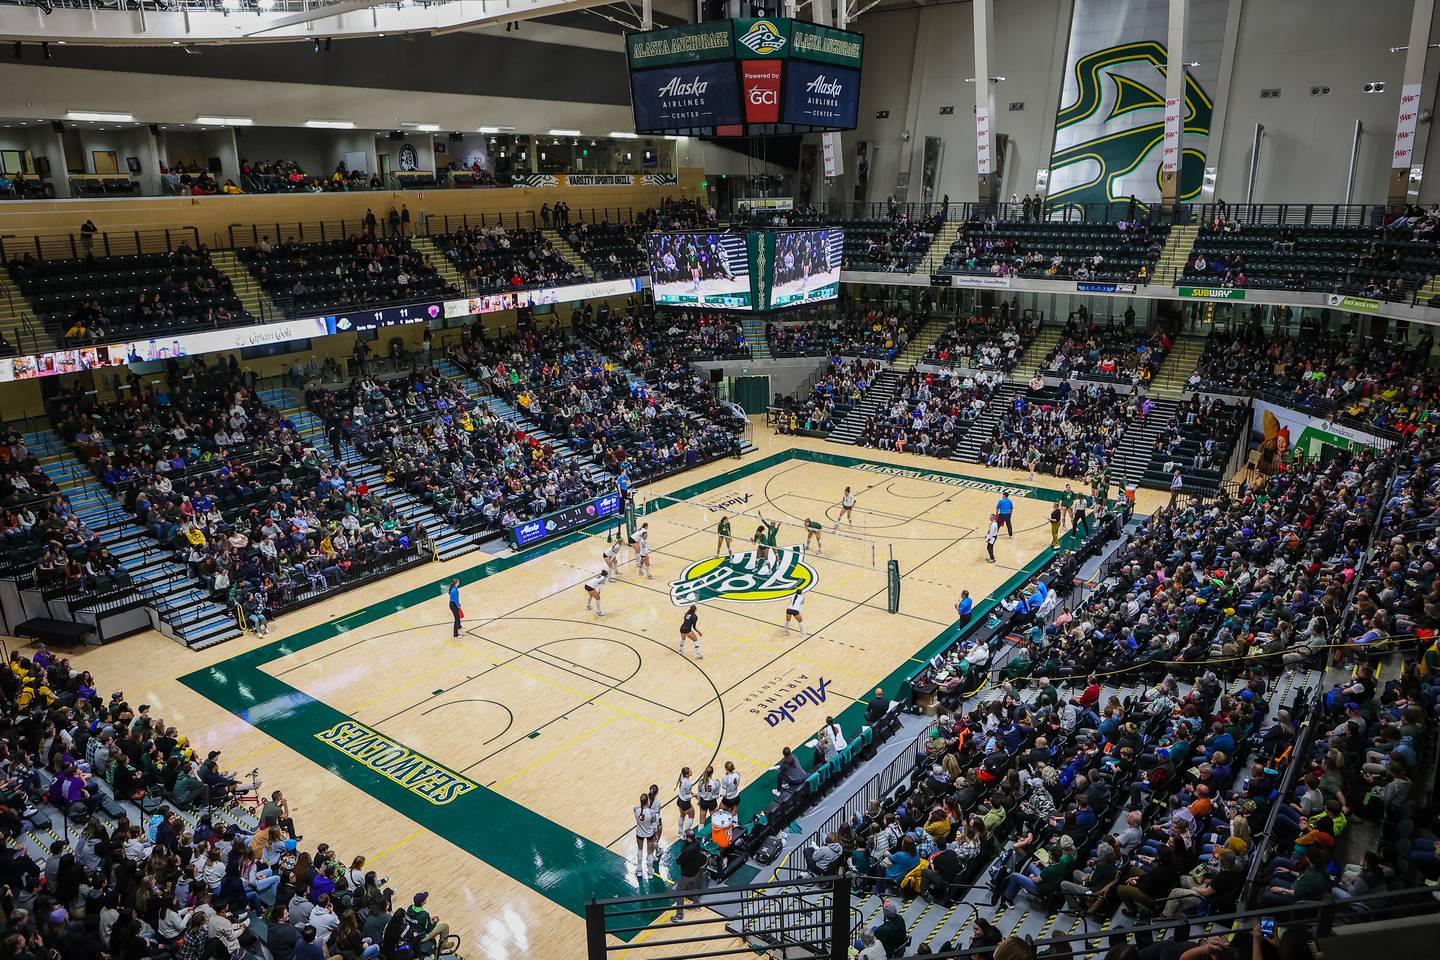 The UAA volleyball team set a new NCAA Division II single-game regular season attendance record 3,888